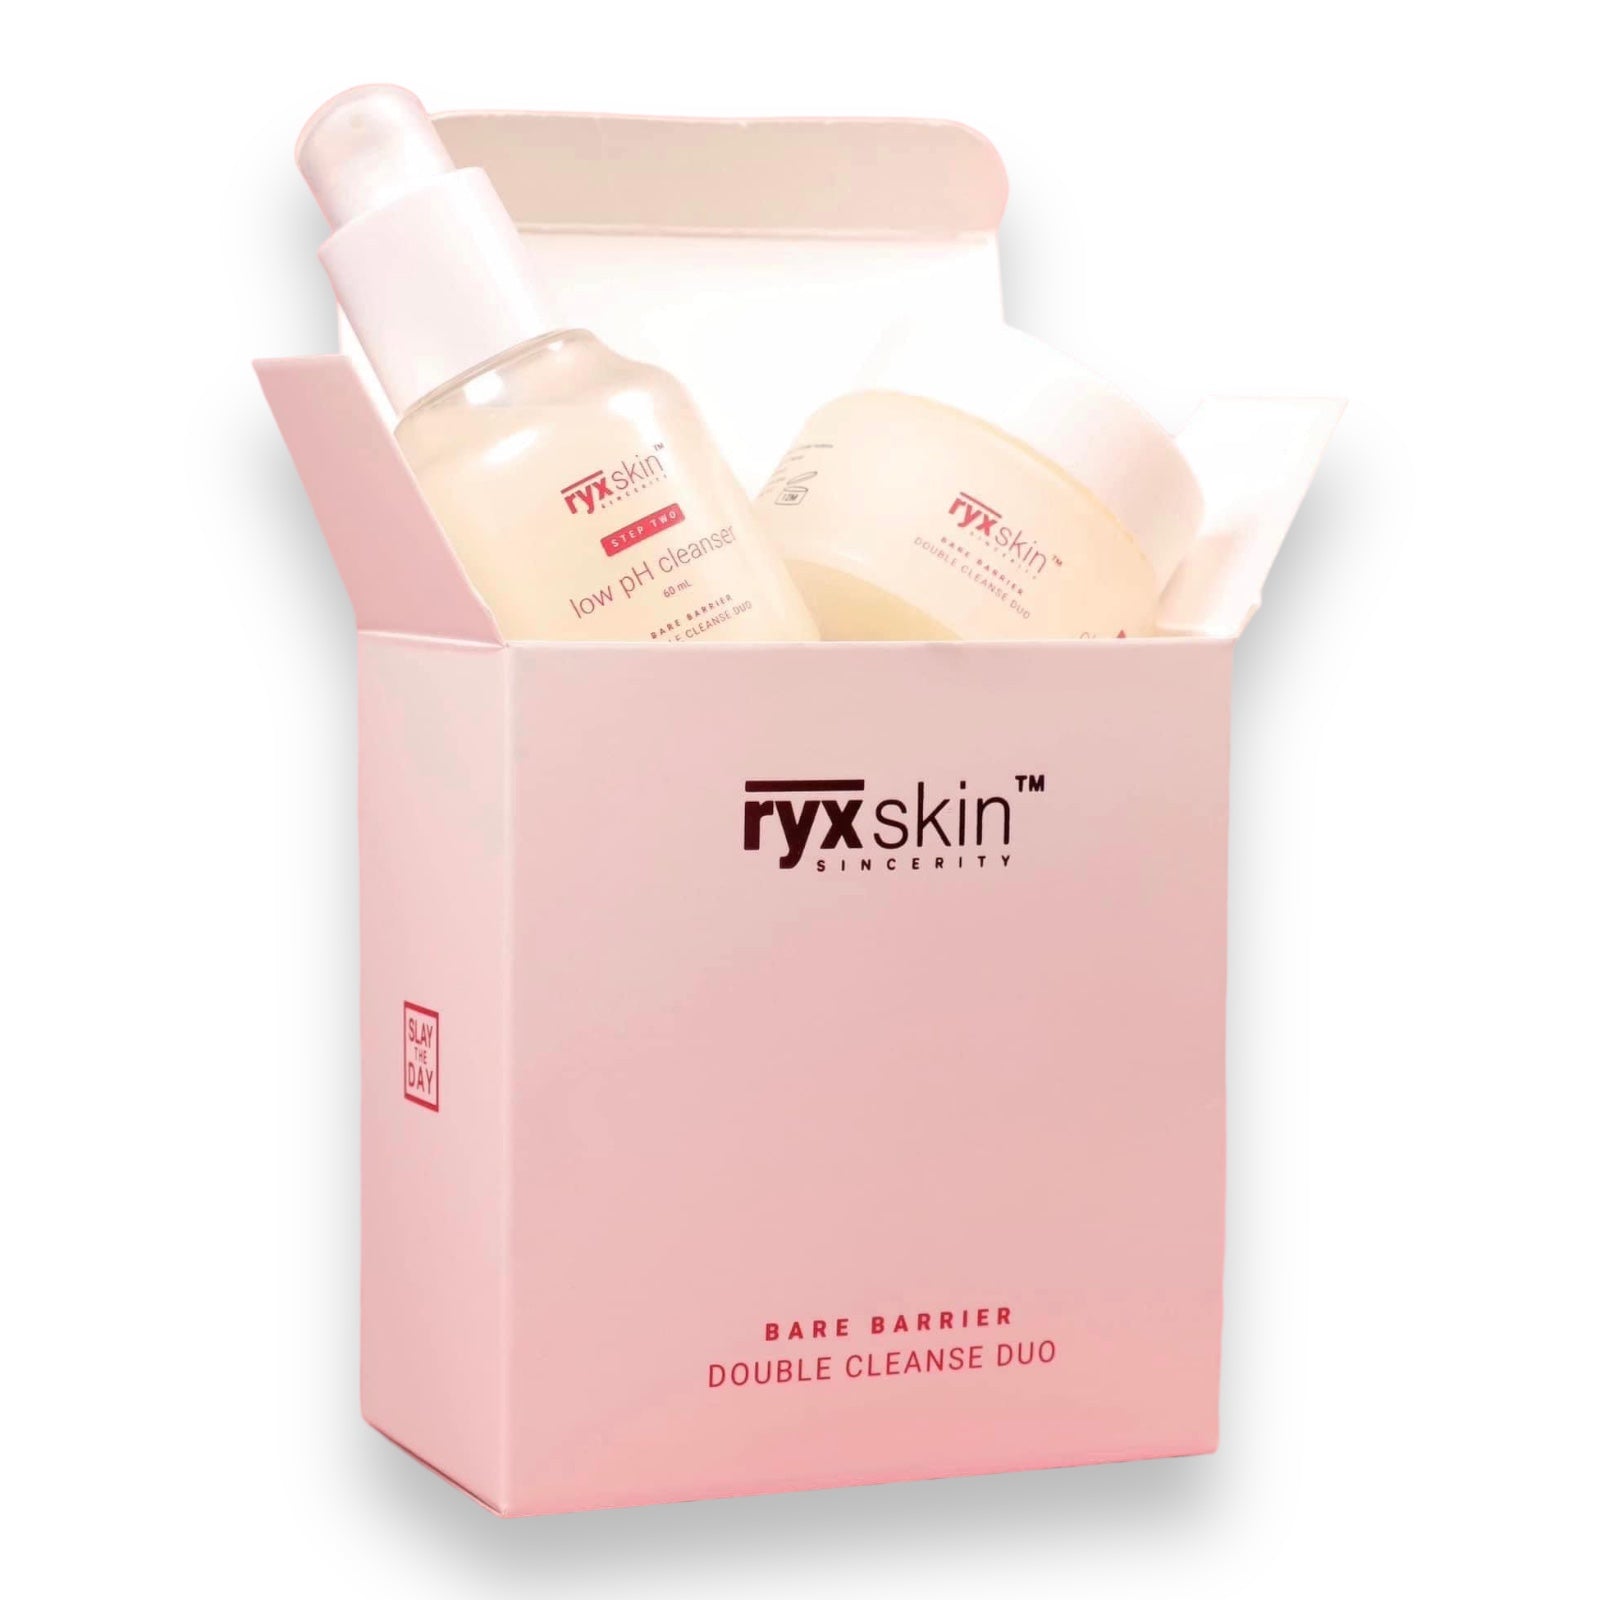 Ryx Skin - Bare Barrier Double Cleanse Duo